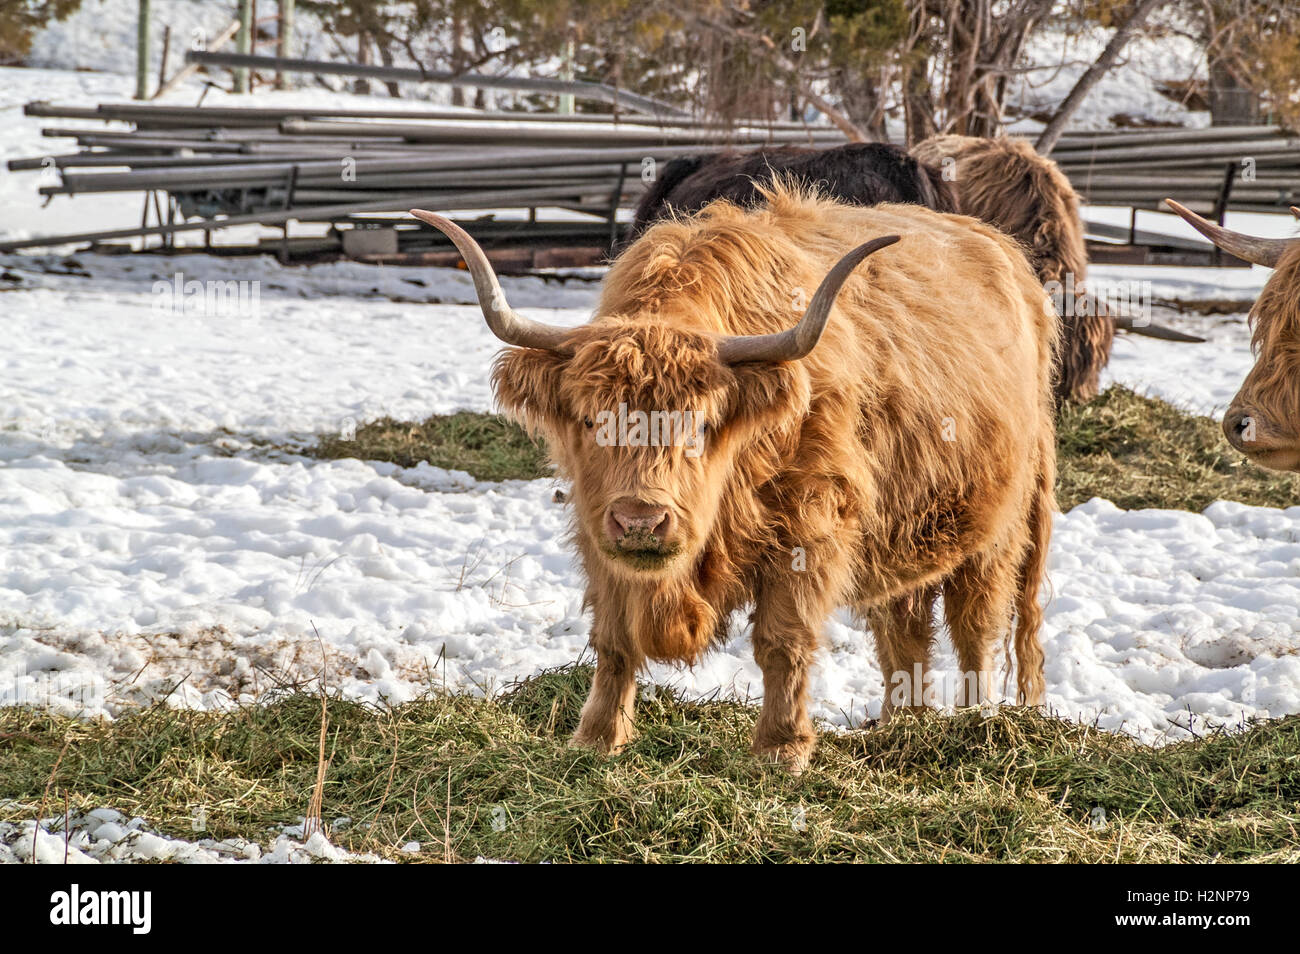 Shaggy haired, long horned Highland cattle. Stock Photo